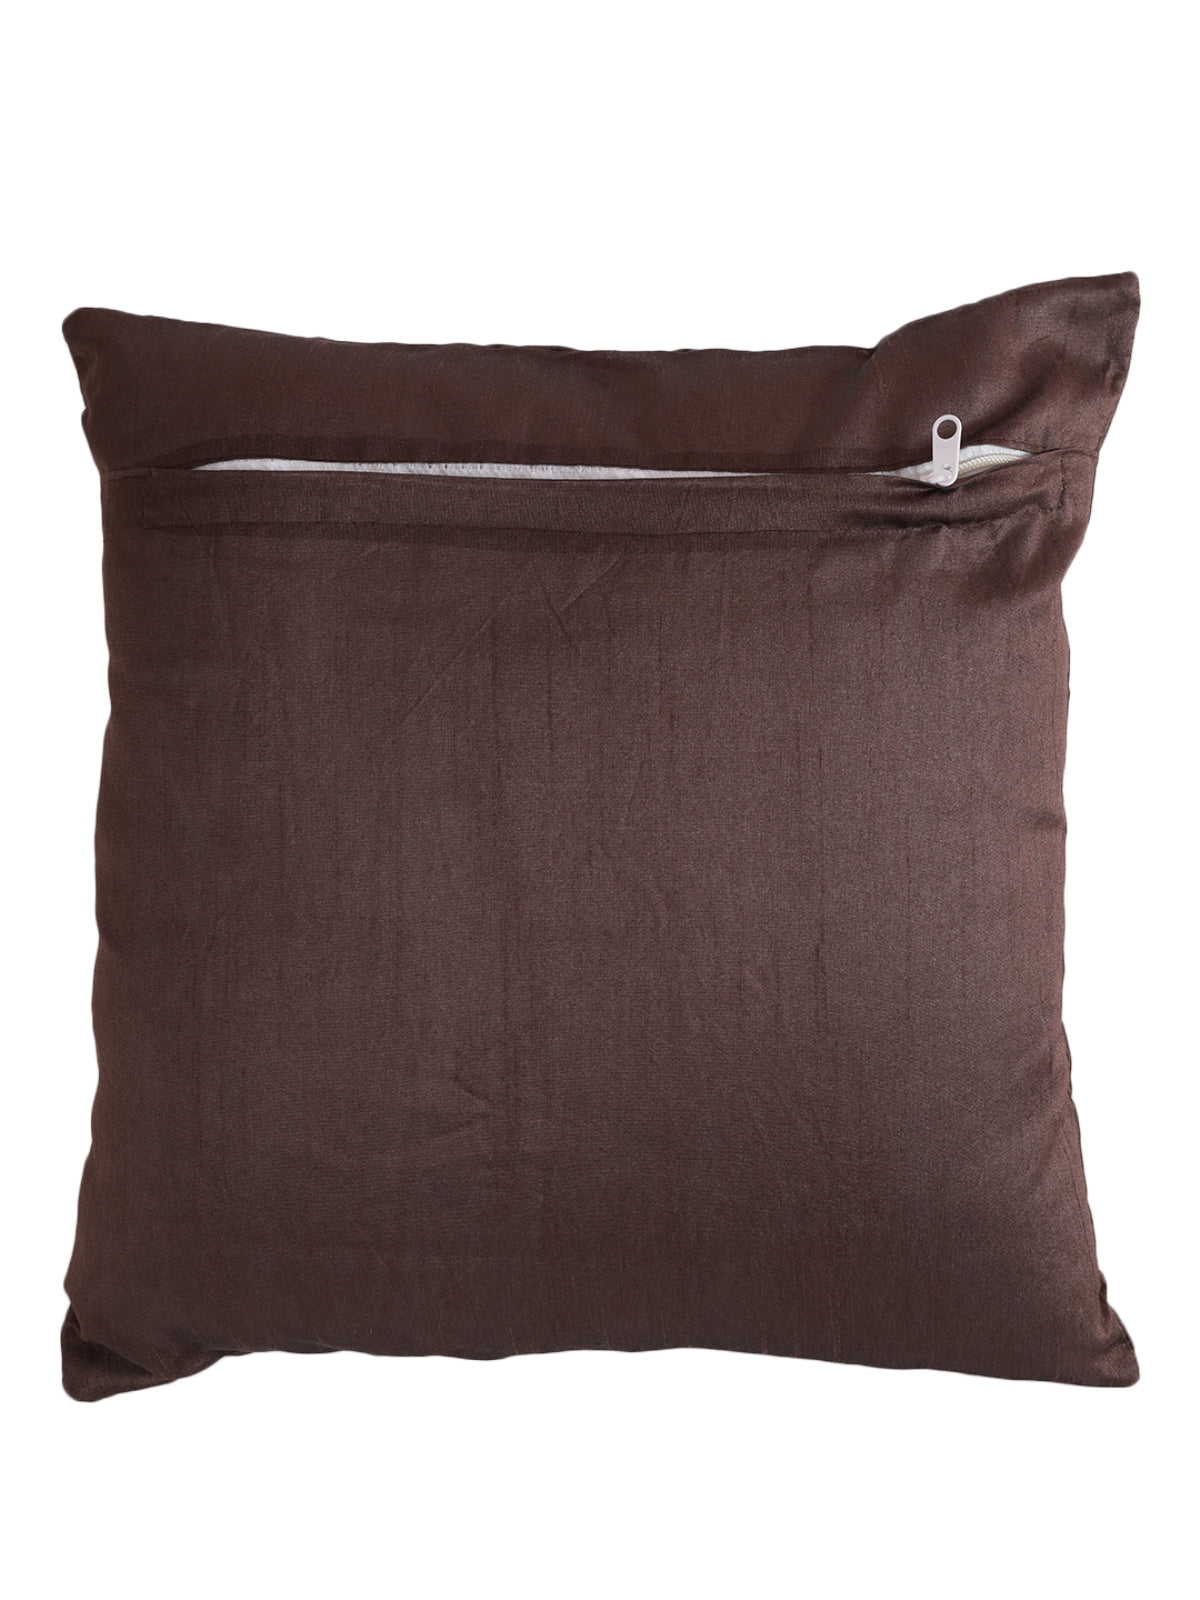 Polyester Geometric Design Cushion Covers 16x16 Inches, Set of 5 - Coffee Brown